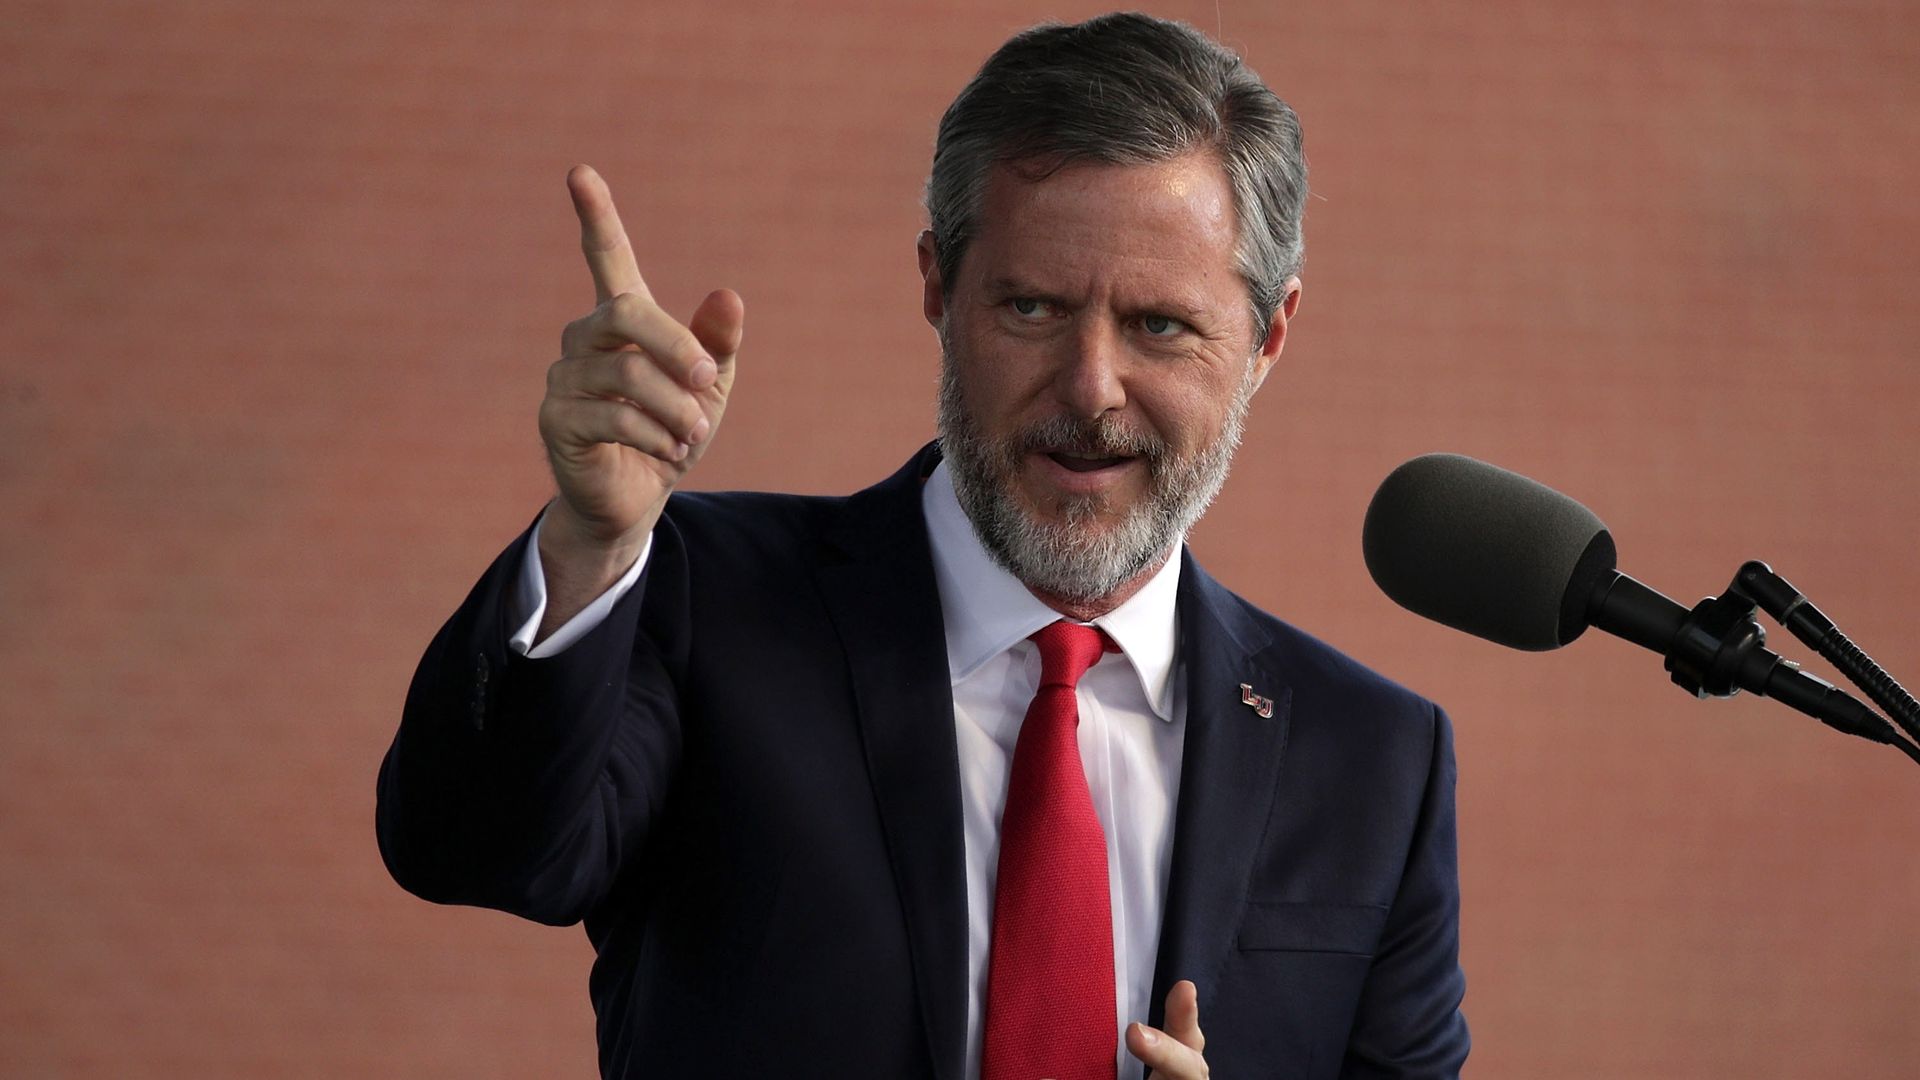 Jerry Falwell speaking during a commencement at Liberty University in May 2017 in Lynchburg, Virginia.